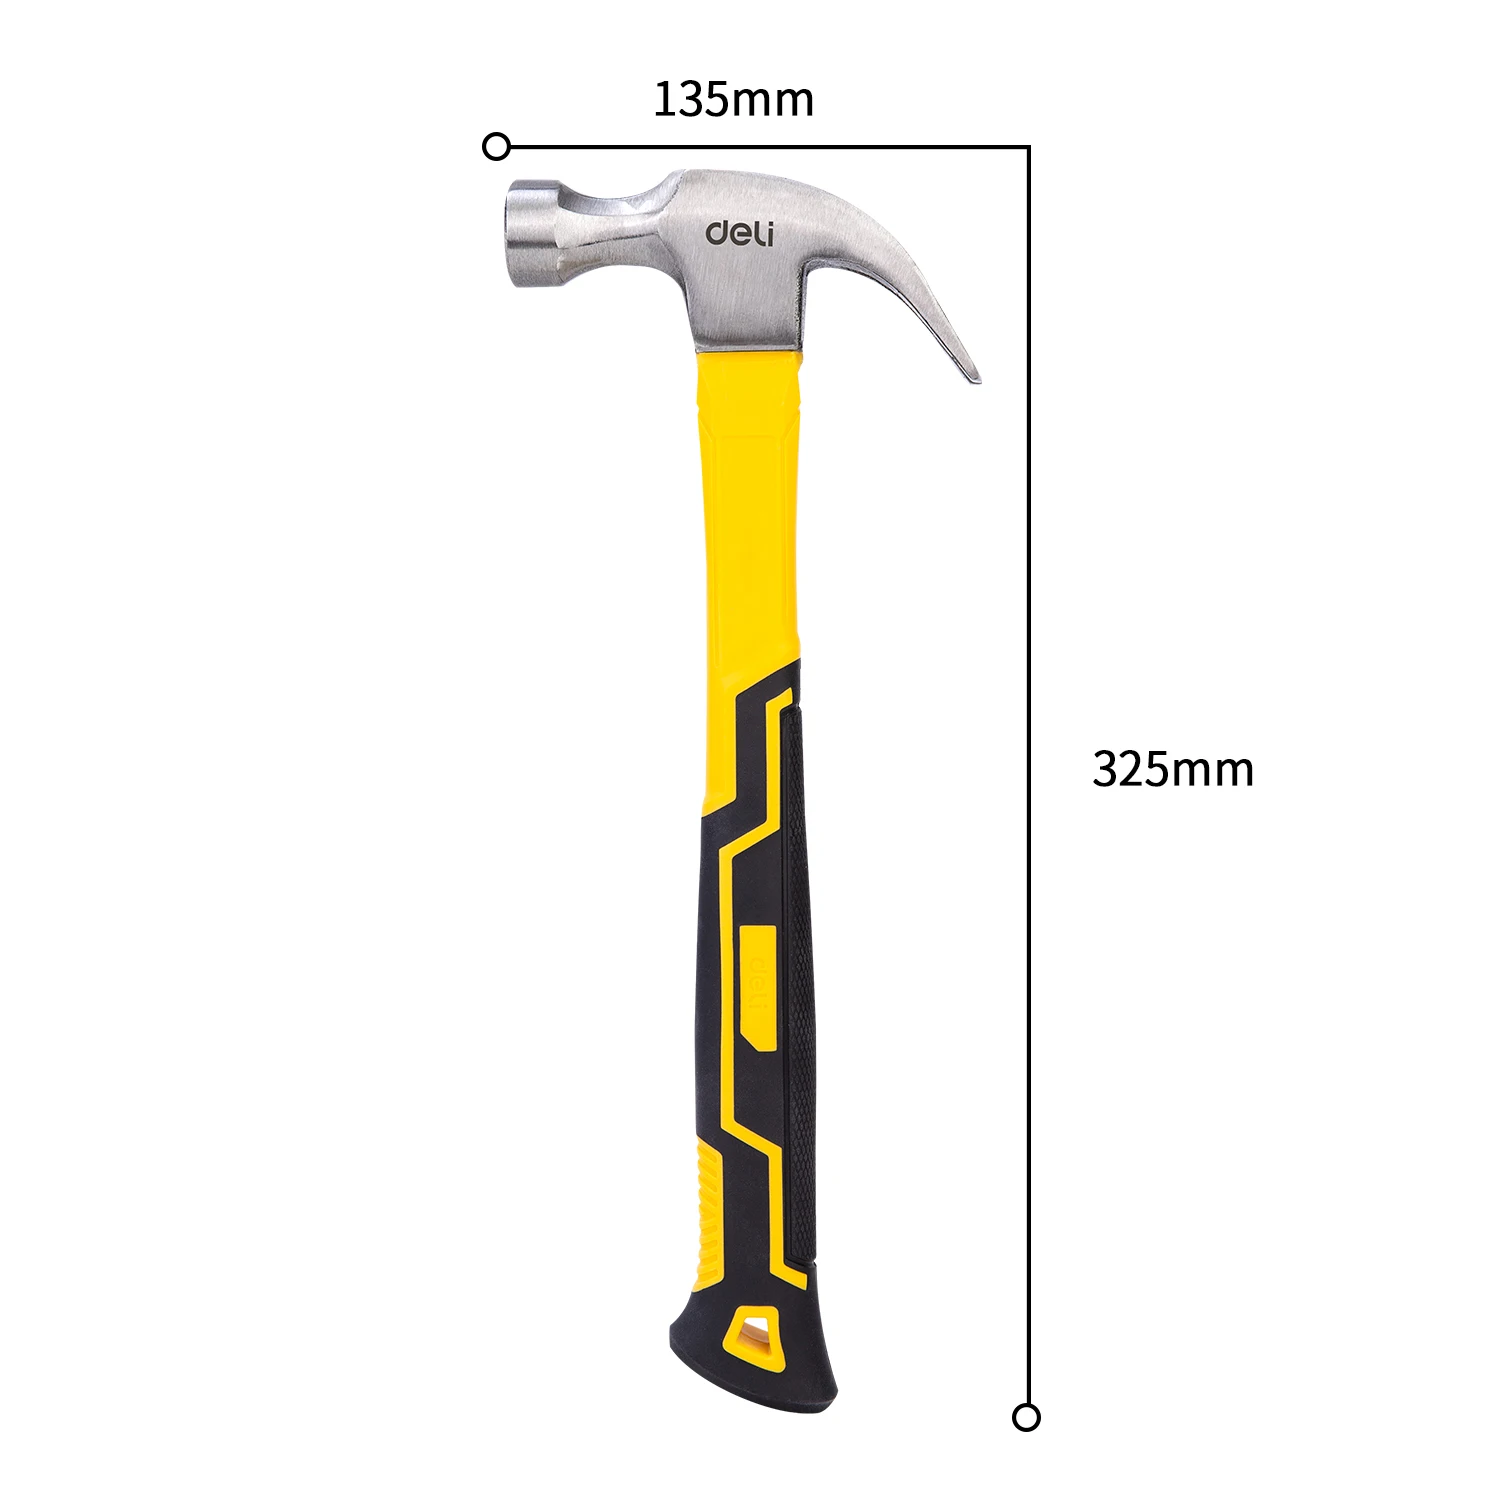 

Deli EDL5002 Hand Tools High Carbon Steel Claw Hammer